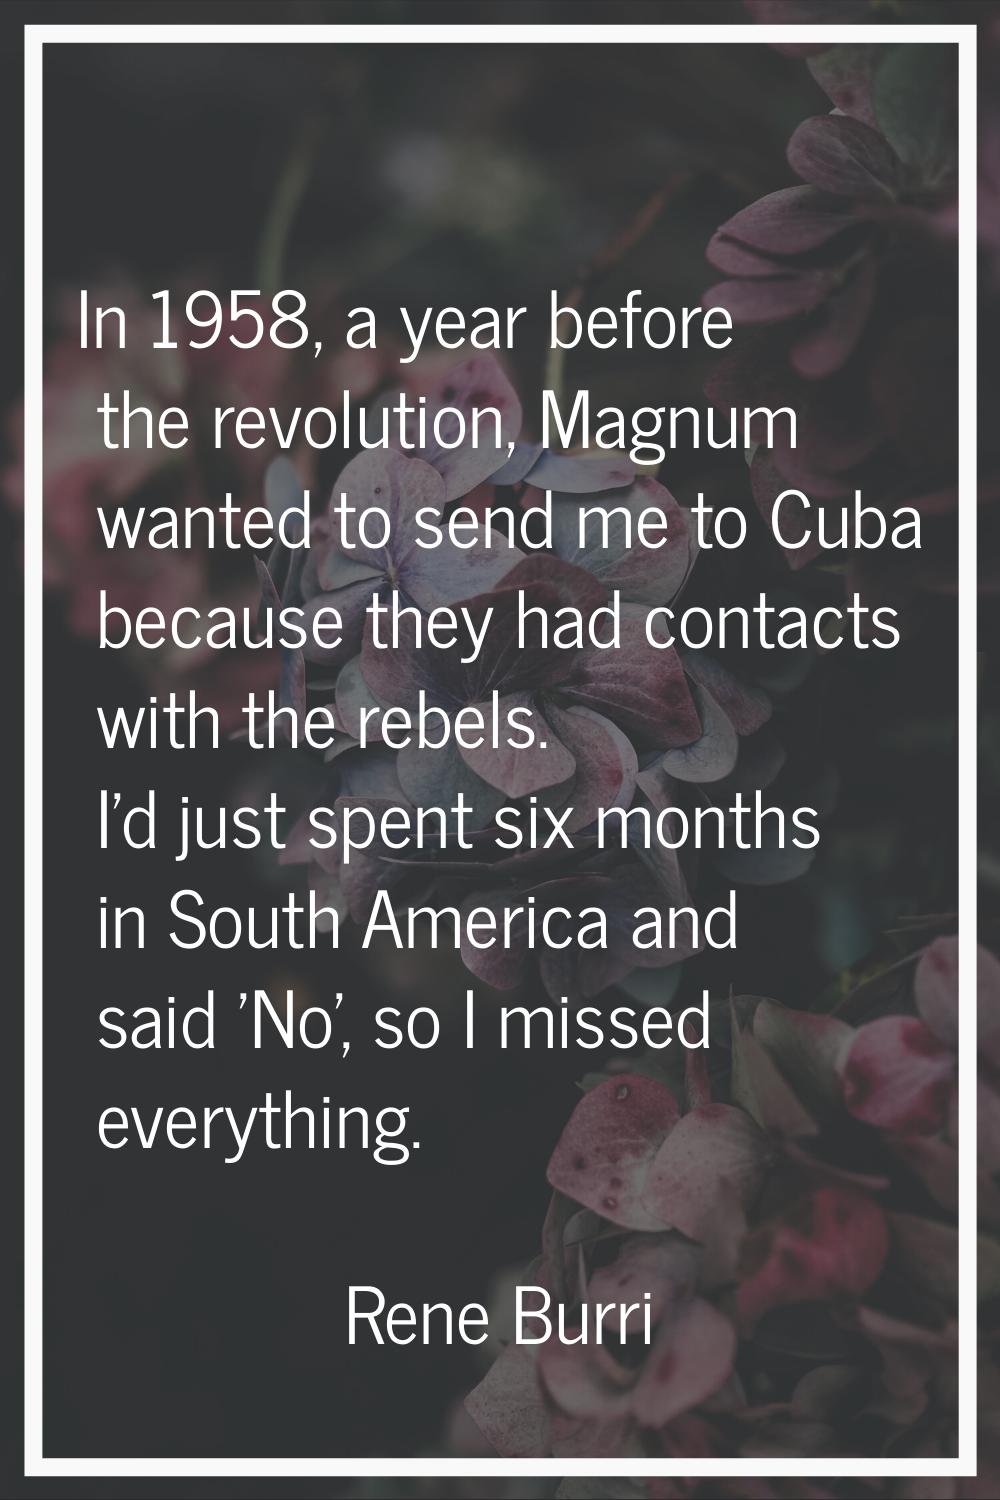 In 1958, a year before the revolution, Magnum wanted to send me to Cuba because they had contacts w